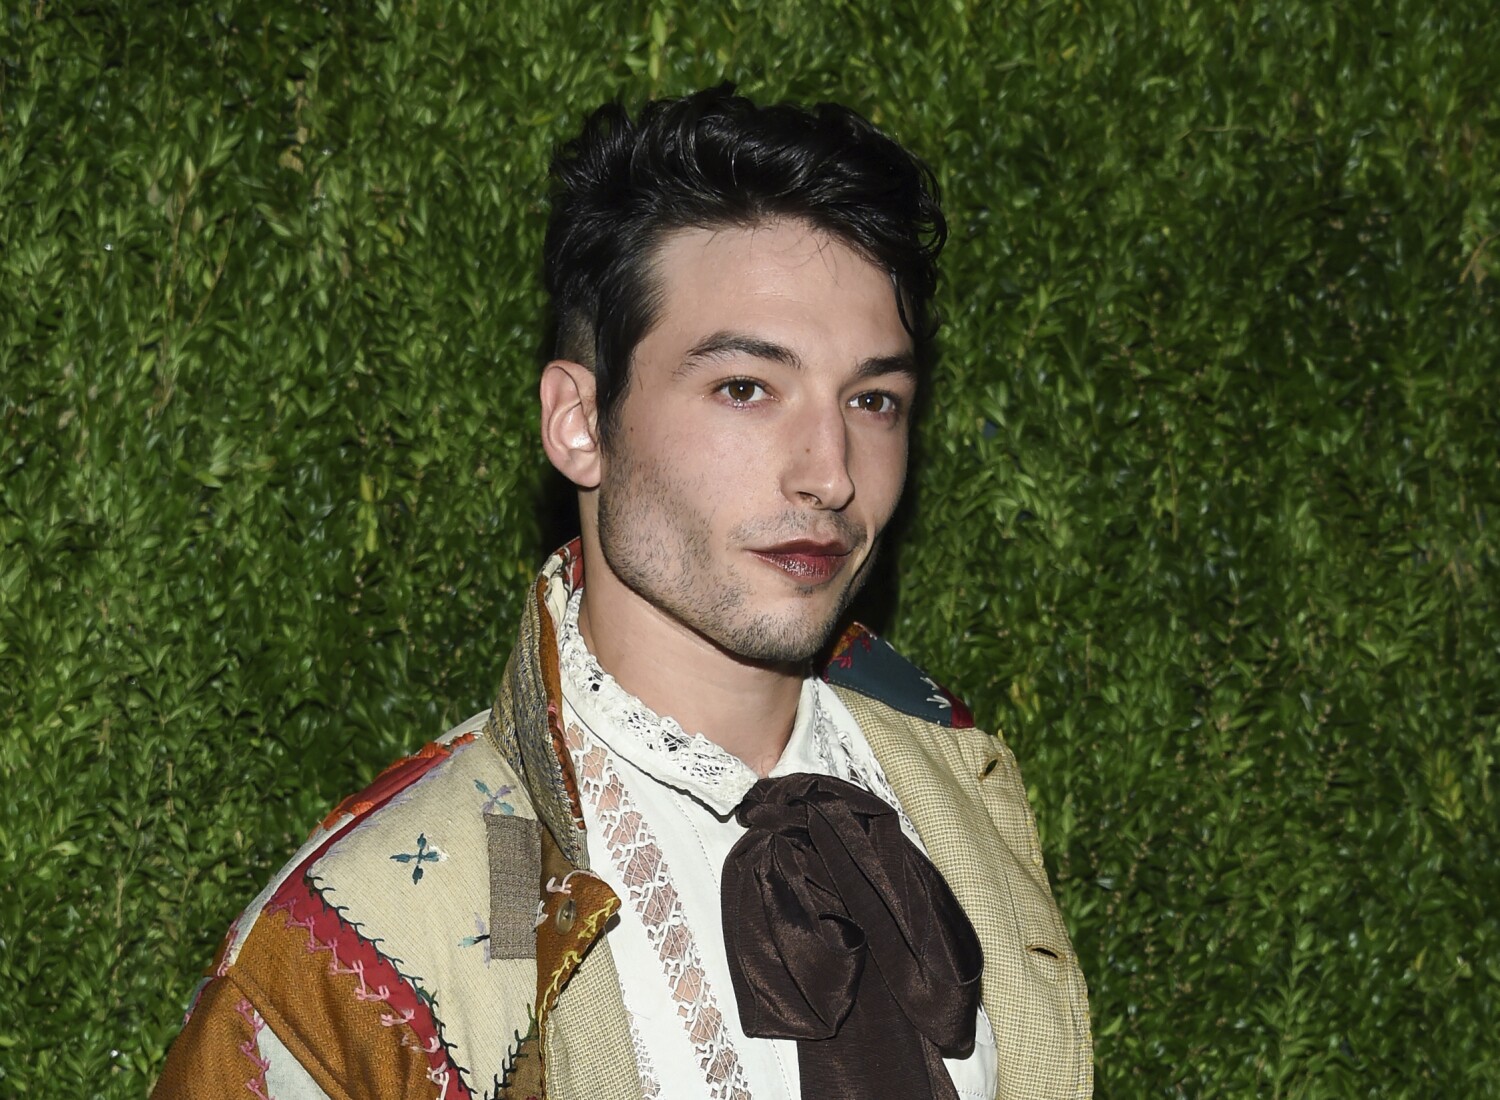 Ezra Miller charged with burglary after allegedly stealing 'several bottles of alcohol'